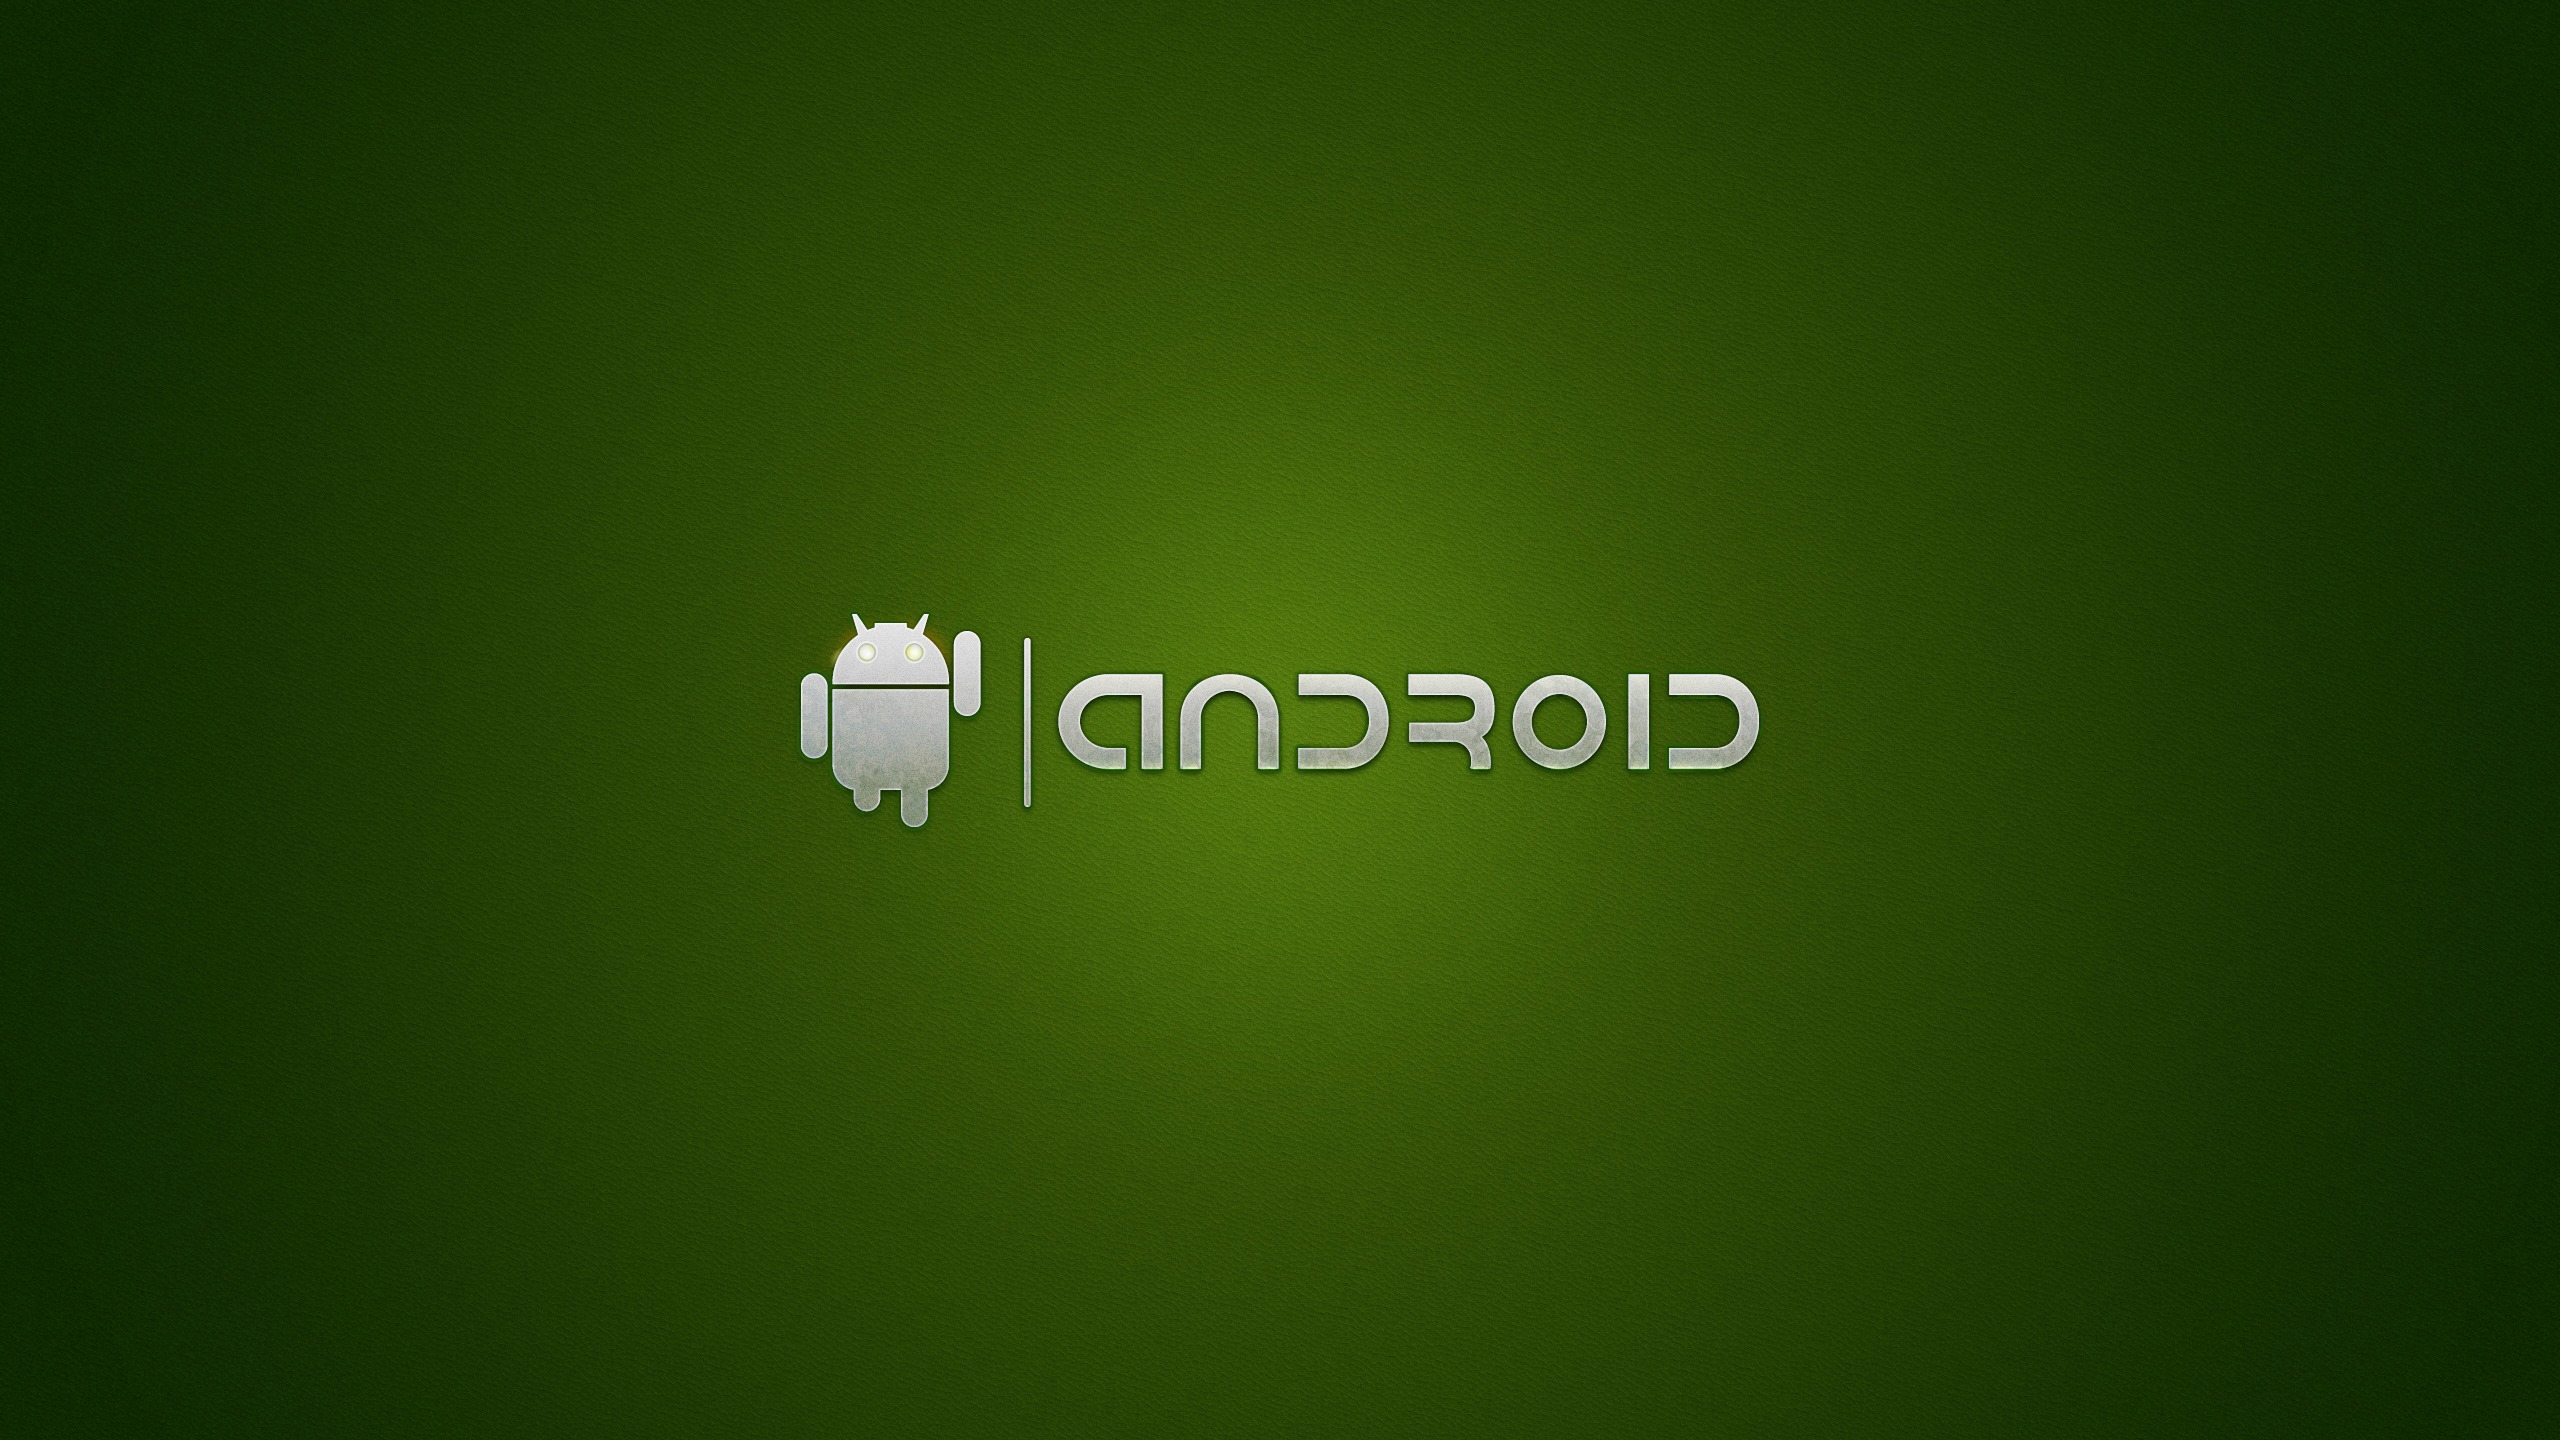 Android for 2560x1440 HDTV resolution